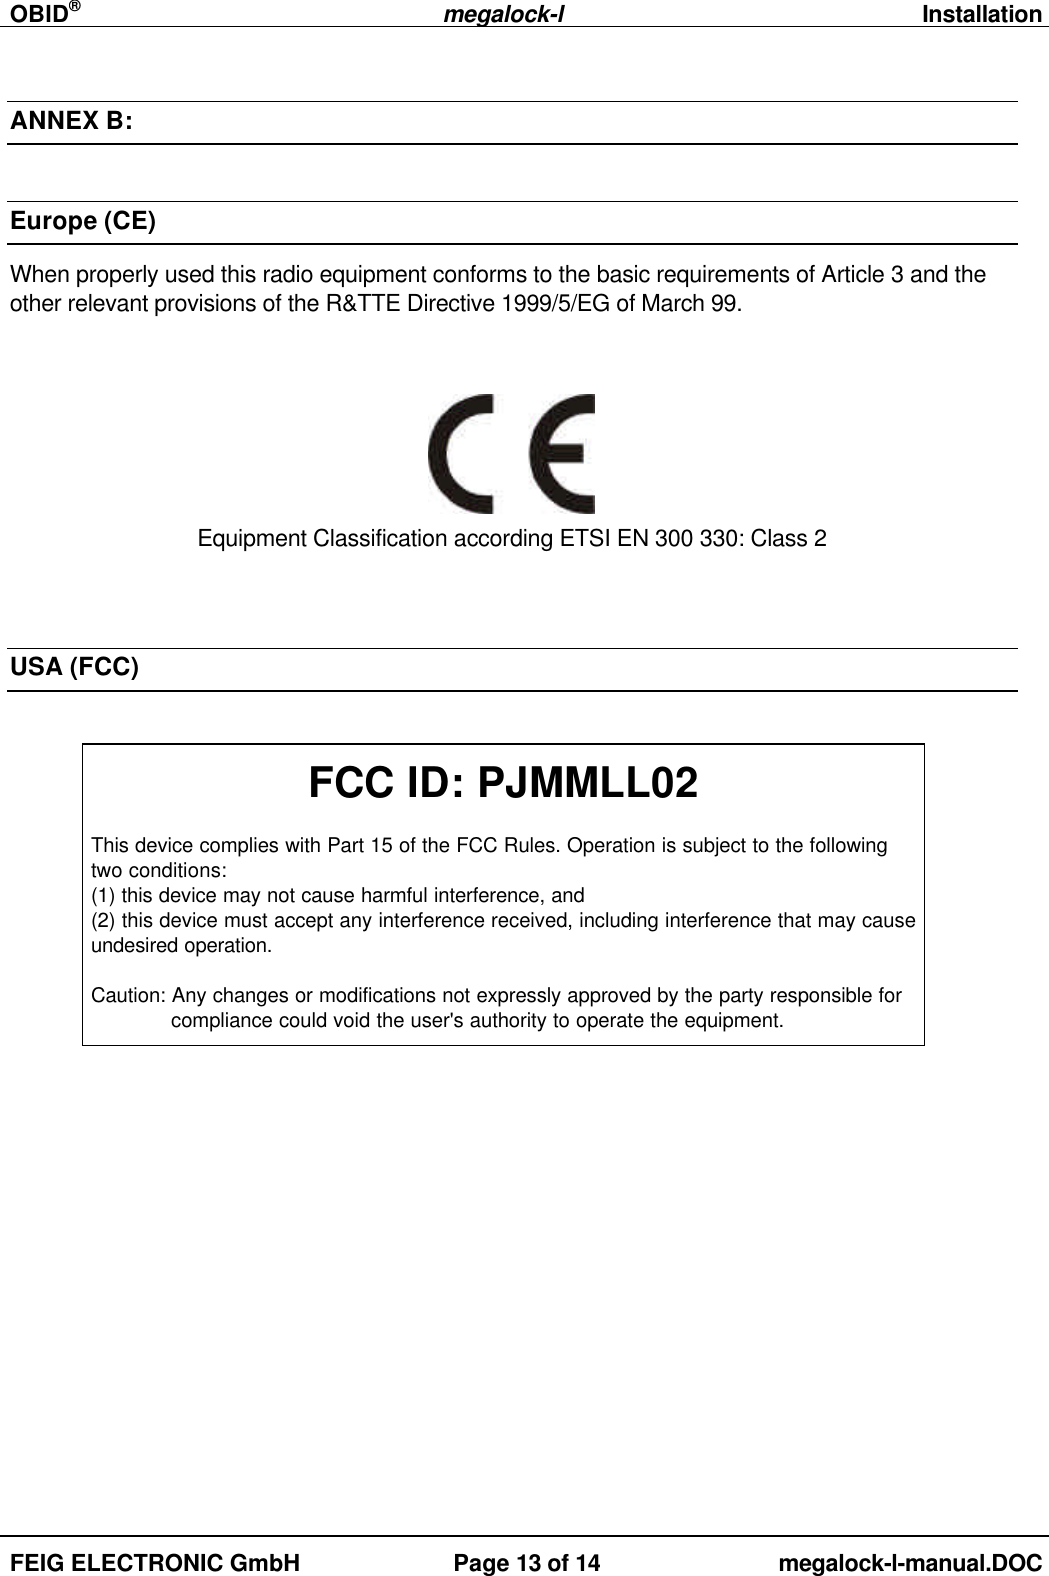 OBID®megalock-lInstallationFEIG ELECTRONIC GmbH Page 13 of 14 megalock-l-manual.DOCANNEX B:Europe (CE)When properly used this radio equipment conforms to the basic requirements of Article 3 and theother relevant provisions of the R&amp;TTE Directive 1999/5/EG of March 99.Equipment Classification according ETSI EN 300 330: Class 2USA (FCC)FCC ID: PJMMLL02This device complies with Part 15 of the FCC Rules. Operation is subject to the followingtwo conditions:(1) this device may not cause harmful interference, and(2) this device must accept any interference received, including interference that may causeundesired operation.Caution: Any changes or modifications not expressly approved by the party responsible for compliance could void the user&apos;s authority to operate the equipment.